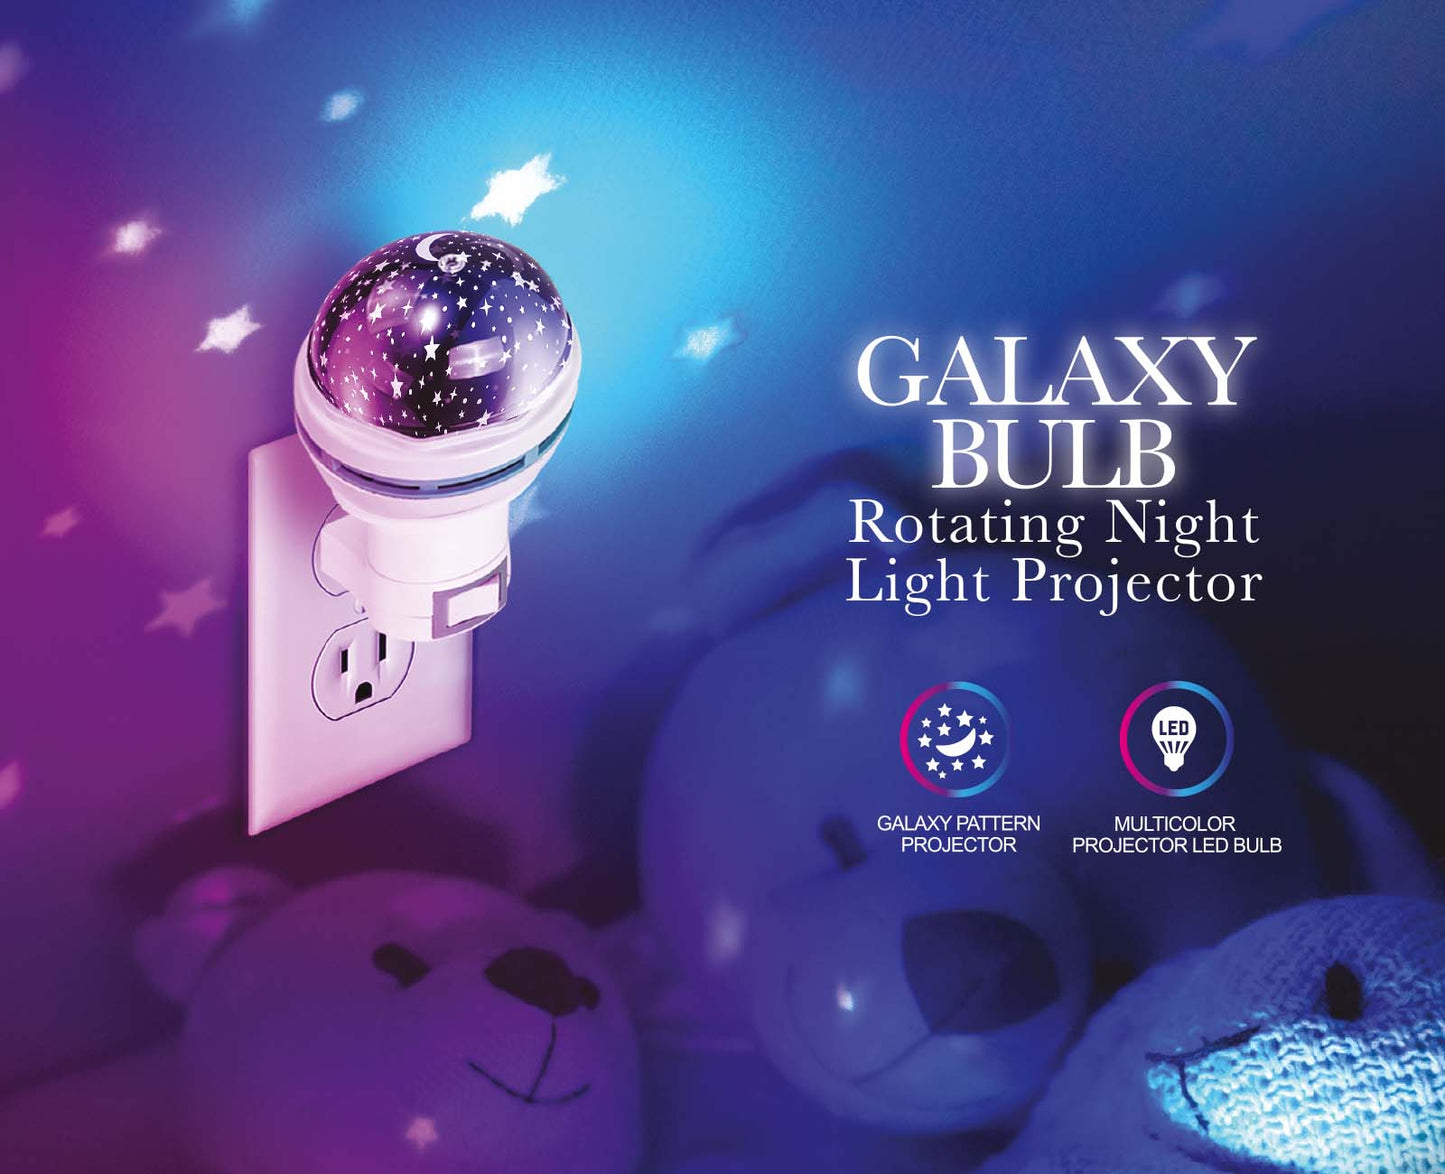 TOPTECH Star Projector Galaxy Bulb Projector for Bedroom, Rotating Bluetooth Speaker with Lighting Shows, socket included, Night Light Projector for Kids/Teenger/Adults/Ceiling/Activity